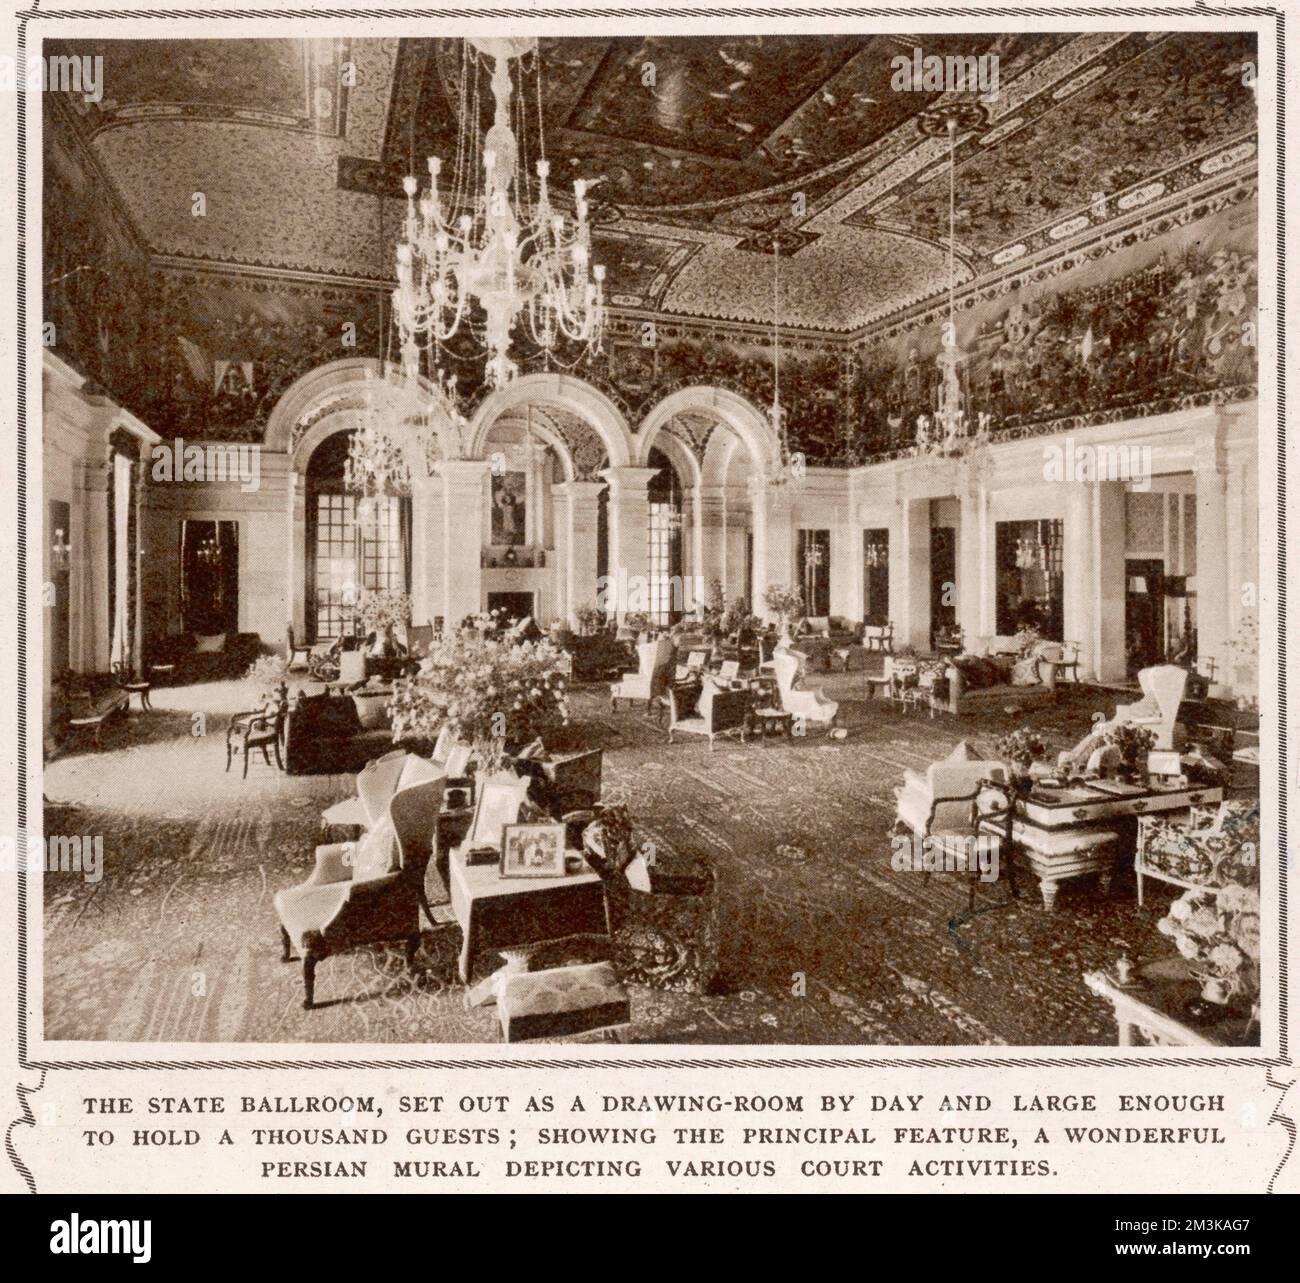 The State ballroom of the Viceroy of India's house in New Delhi, India, large enough to hold 1000 guests and showing the principal feature, a wonderful Persian mural depicting various court activities.  1935 Stock Photo